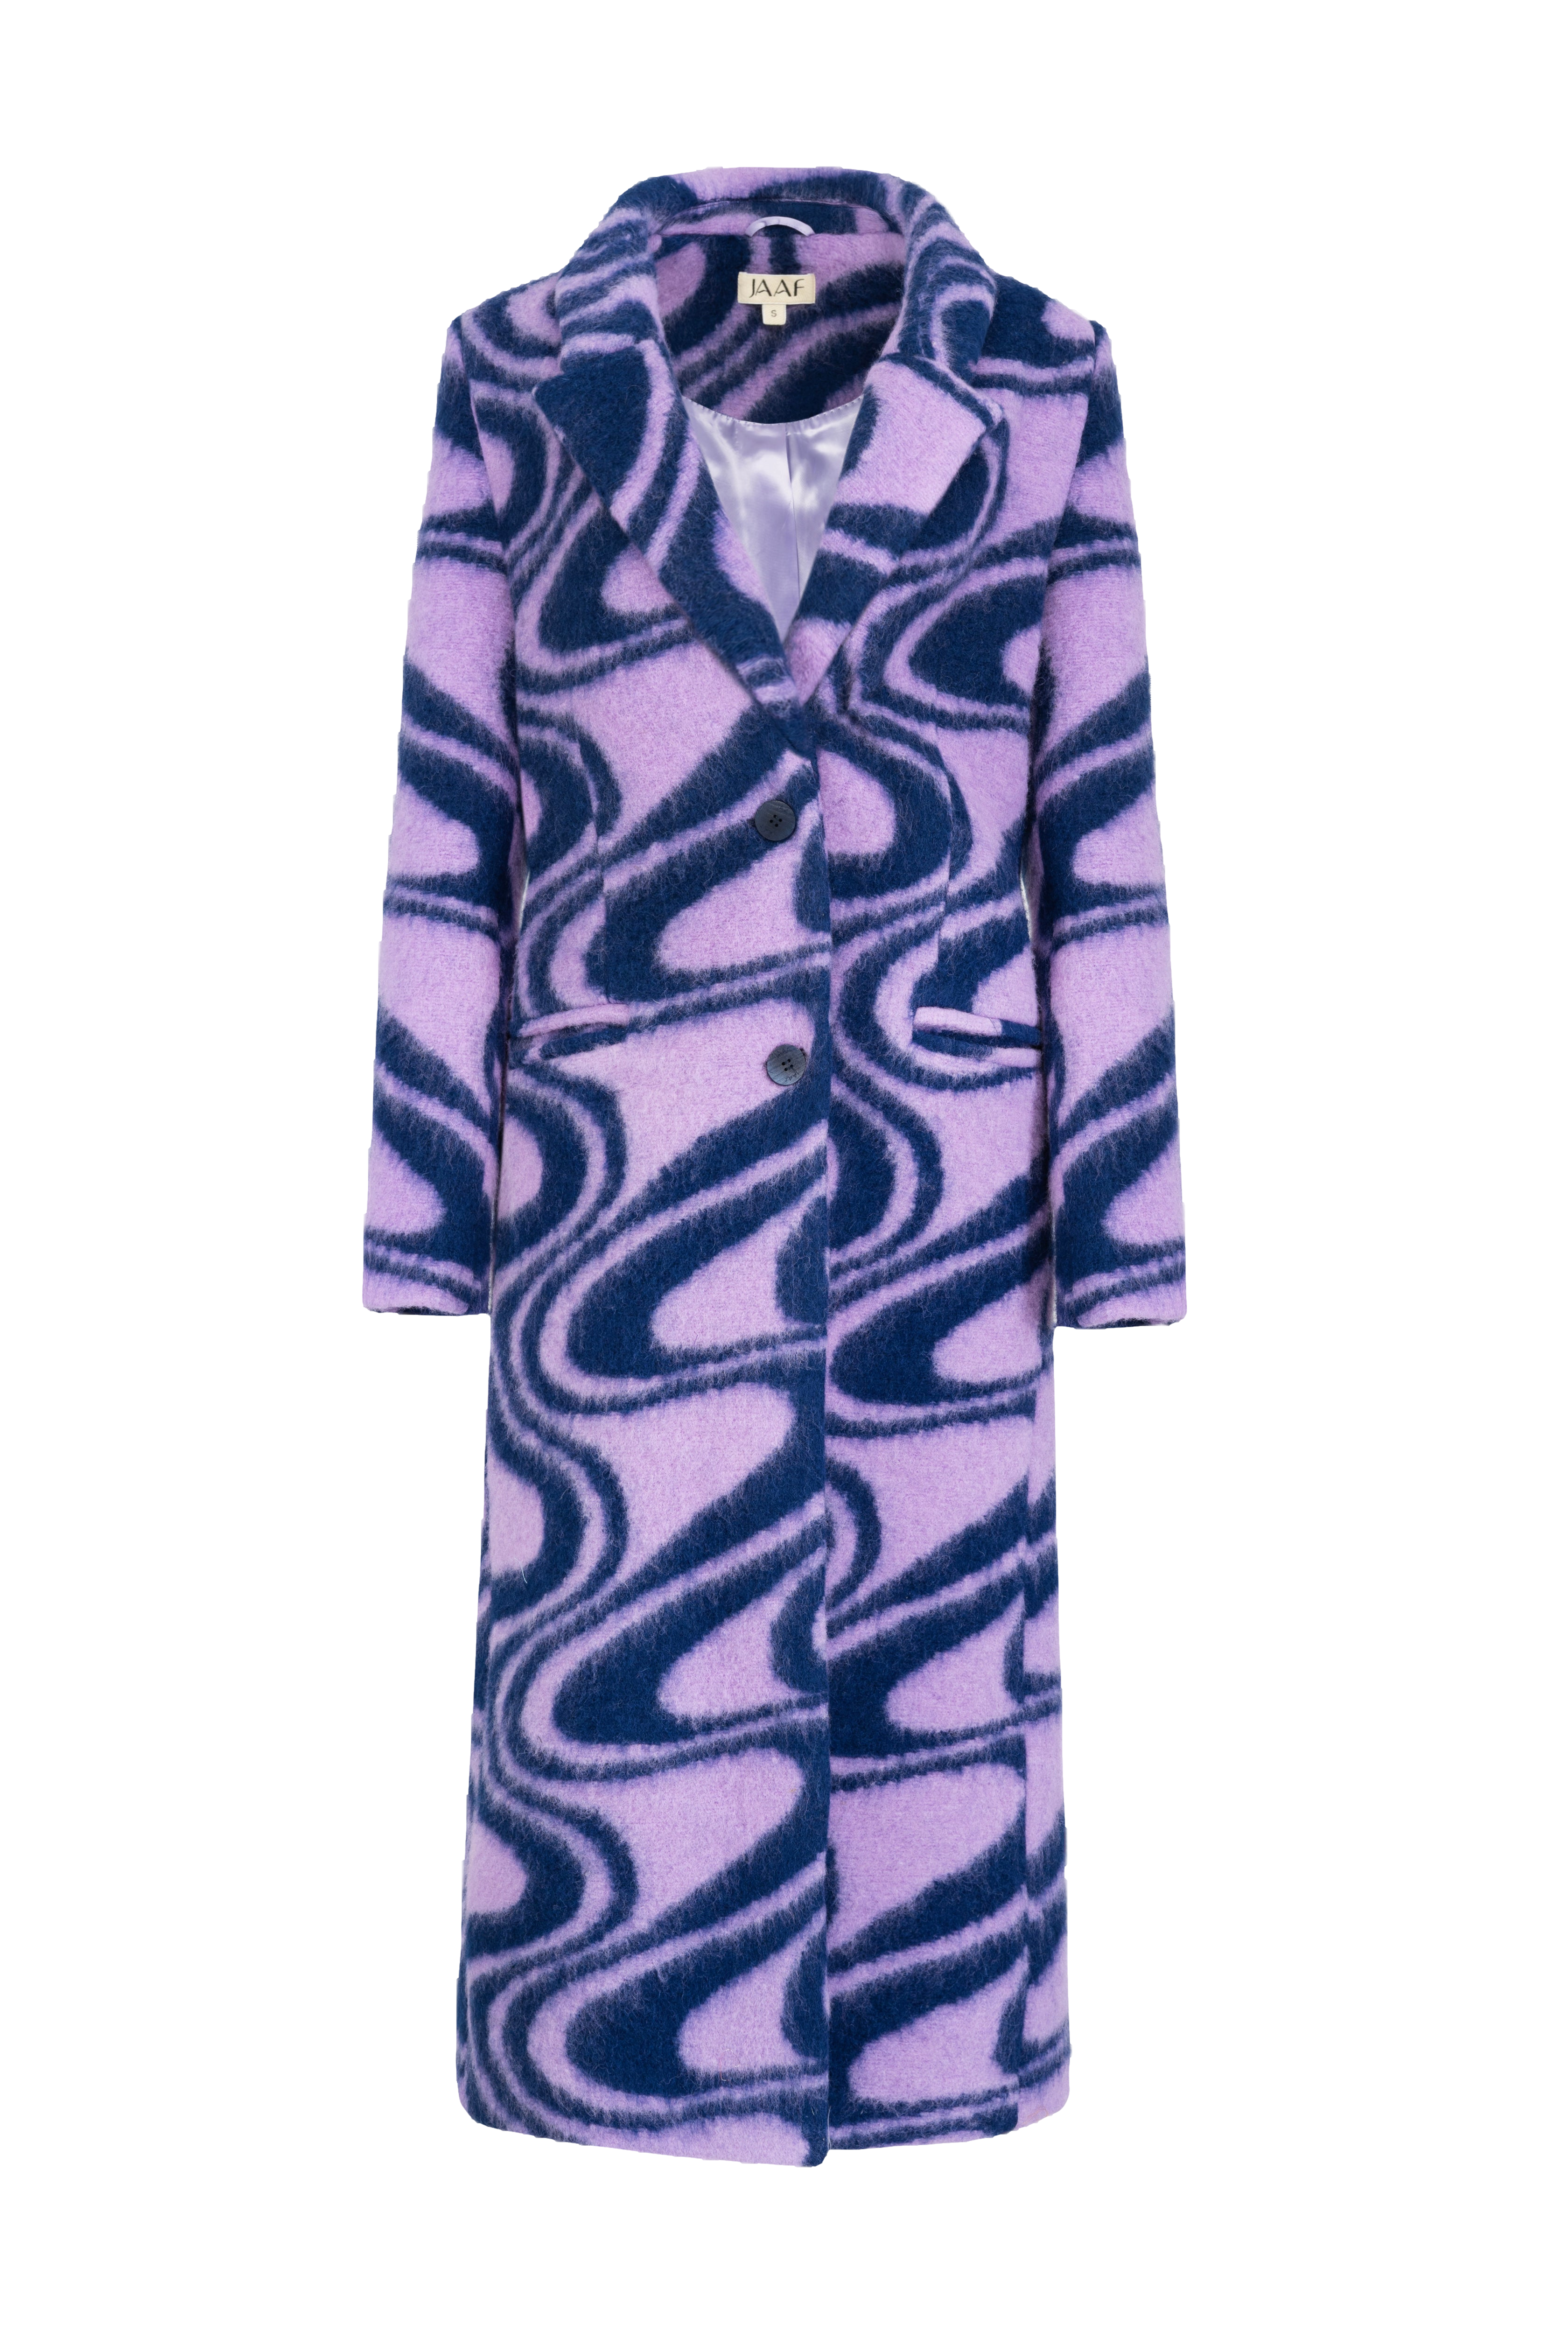 Shop Oversized wool coat in Funky Pattern from JAAF at Seezona 